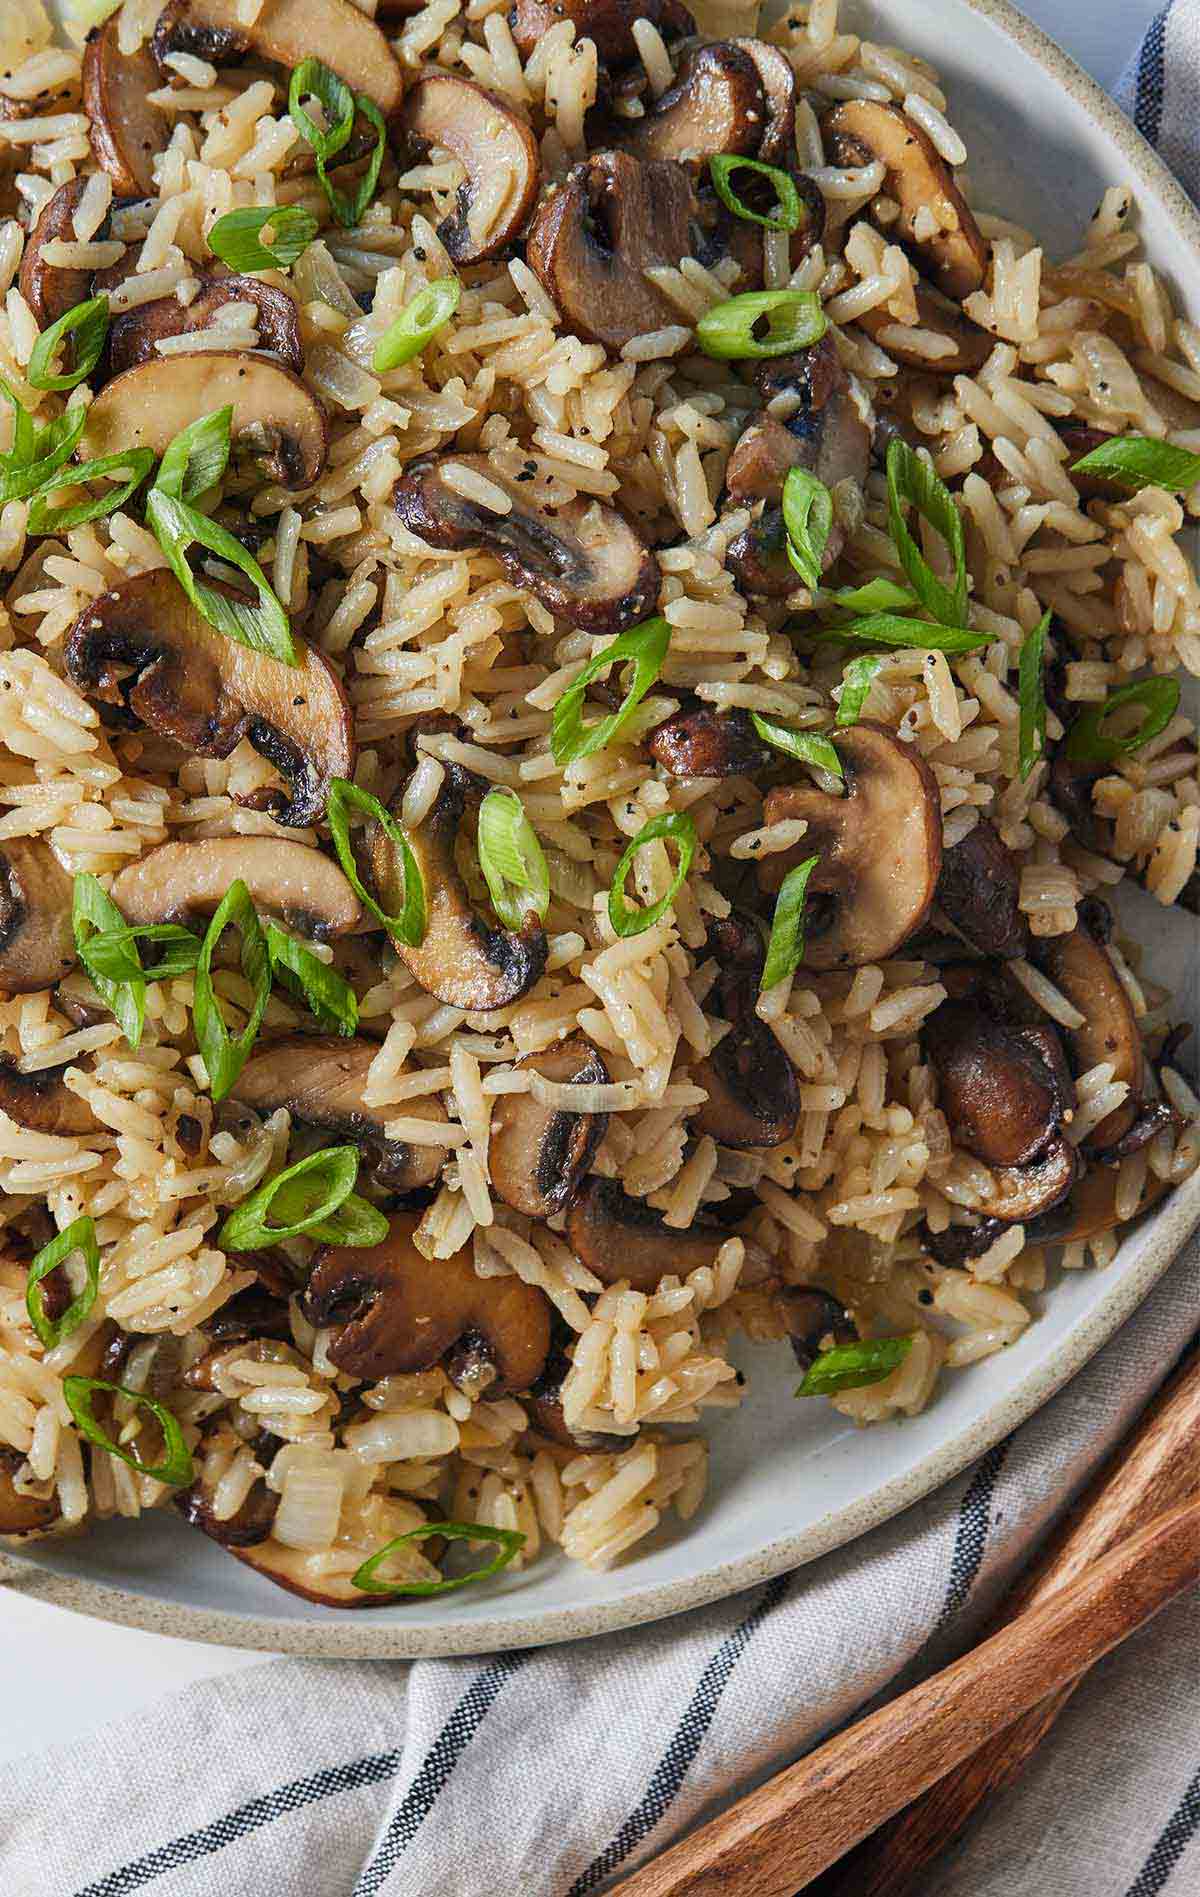 Overhead view of a plate of mushroom rice with sliced green onions on top.